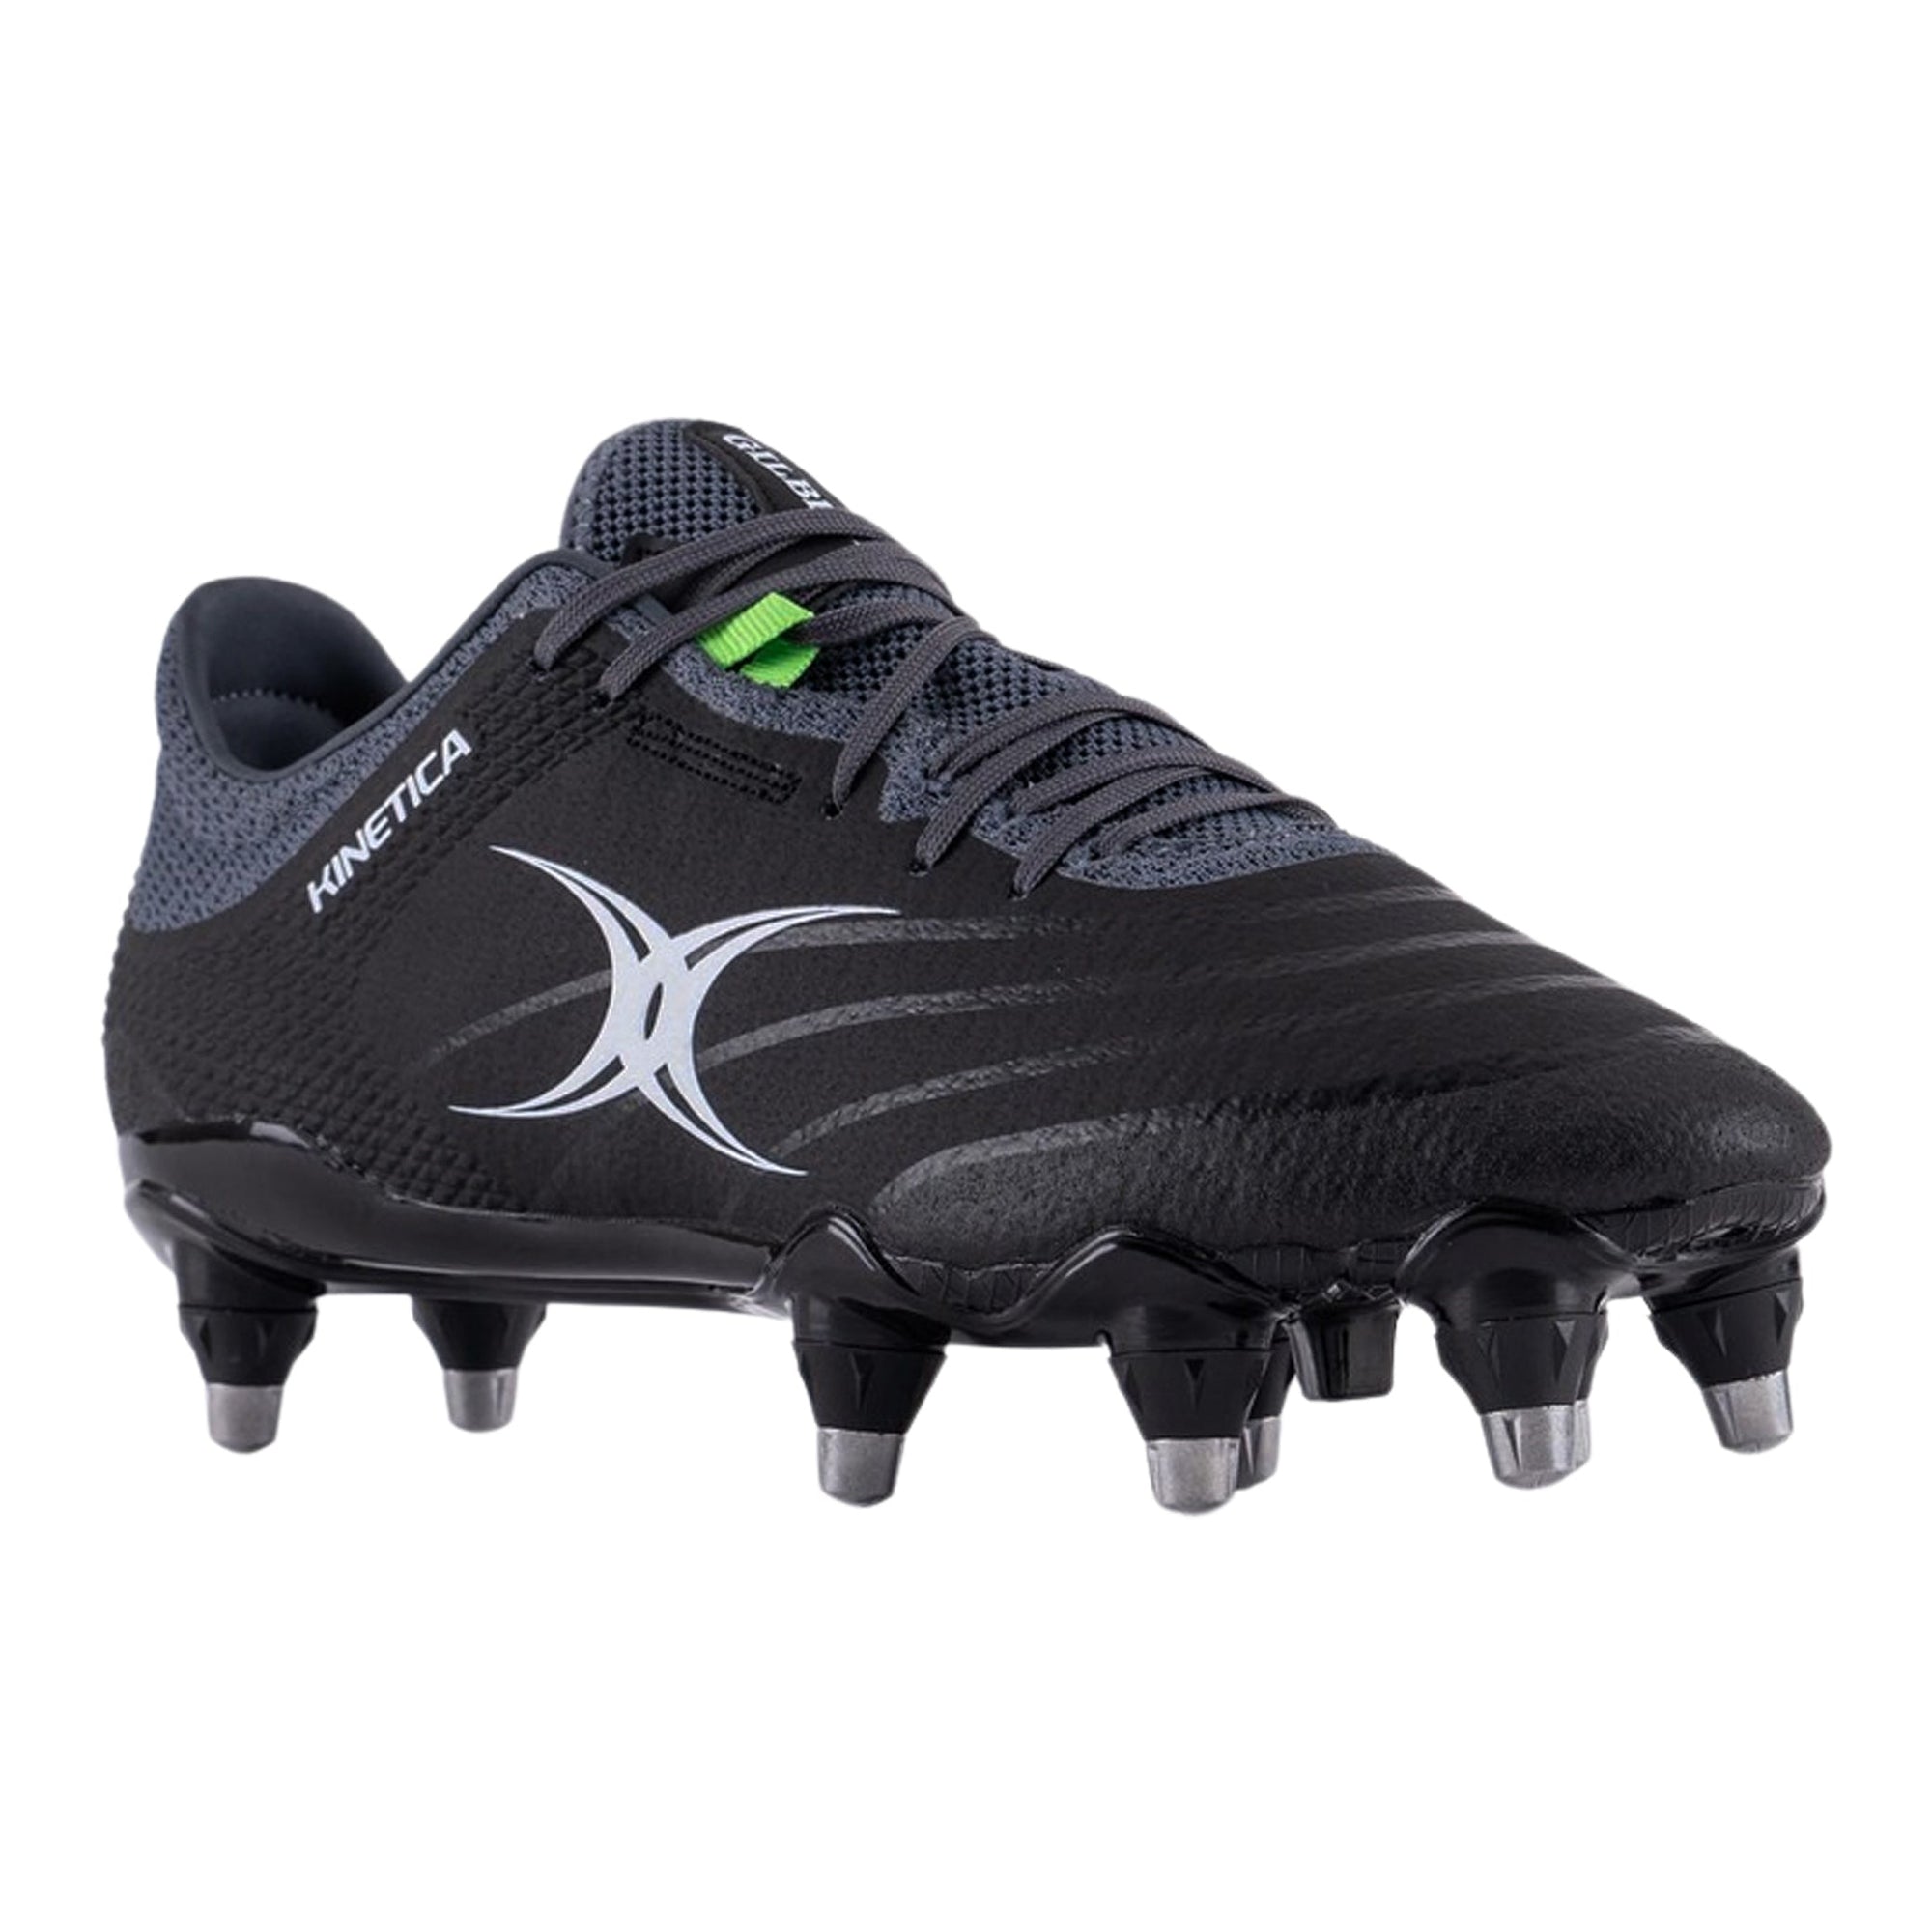 Rugby Boots, adidas, Canterbury, Gilbert